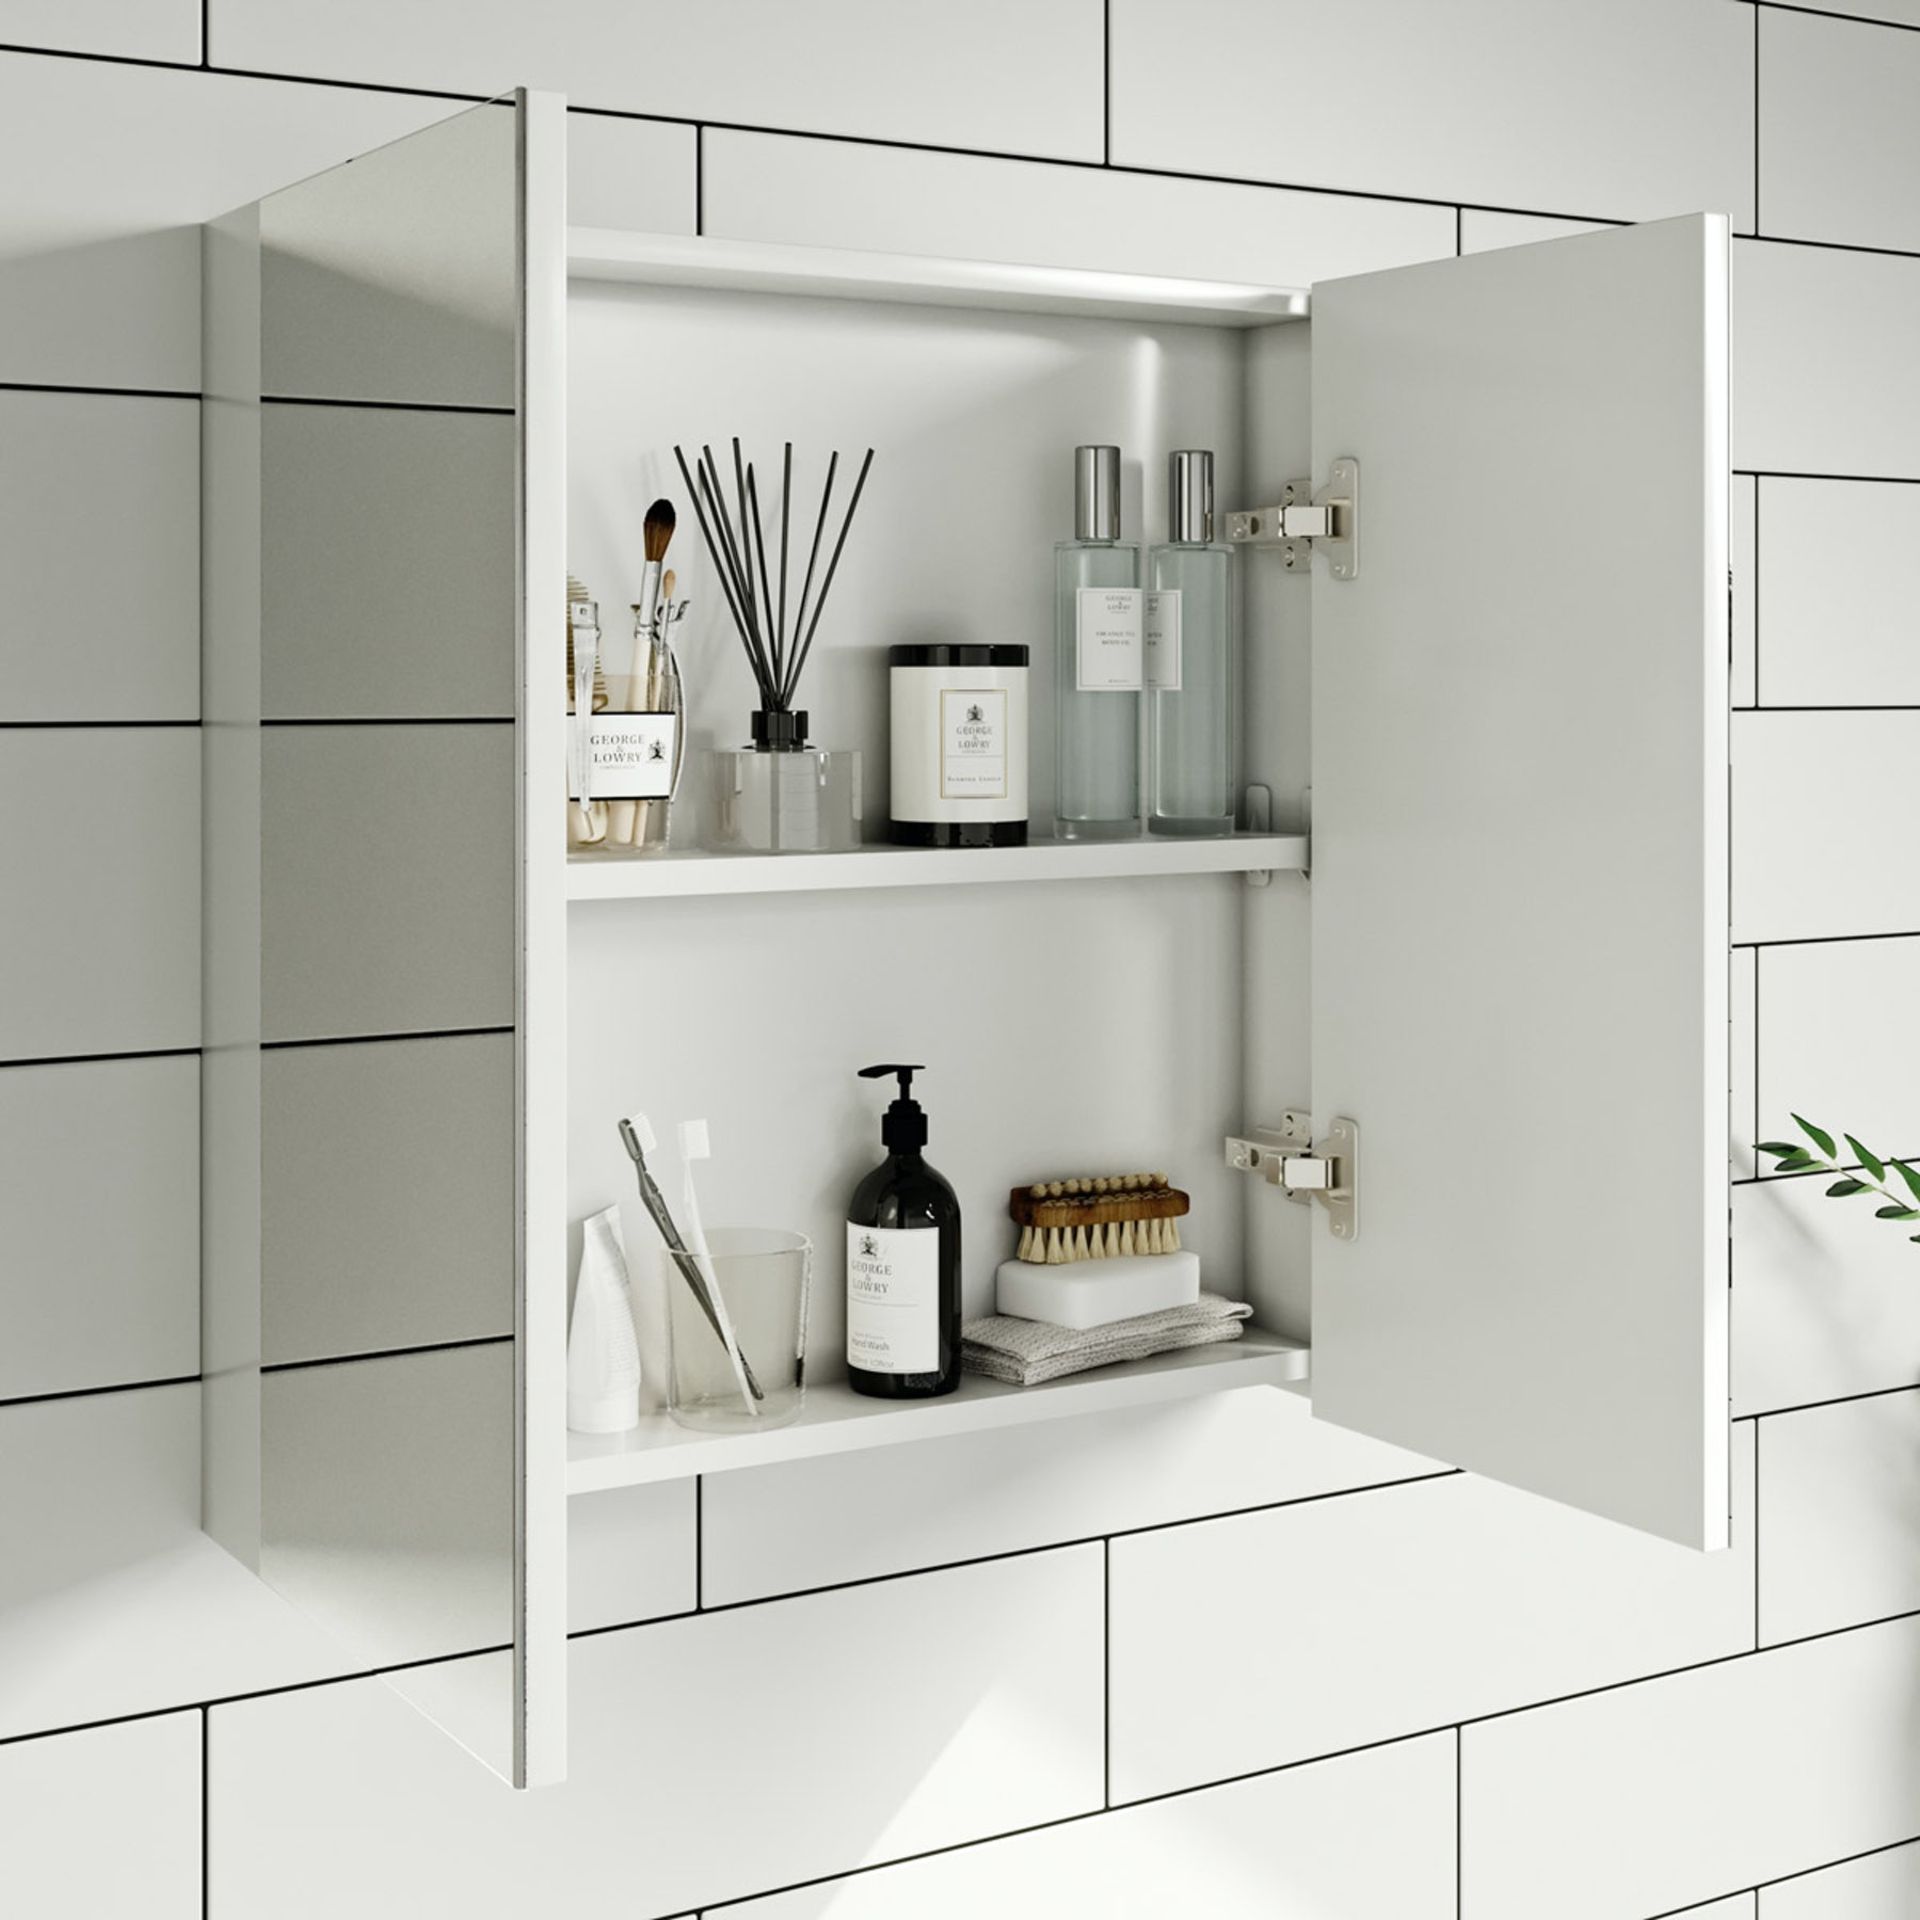 RRP £125. Clarity white mirror cabinet 600 x 600mm. Product code: SMMIR02. - Image 2 of 3